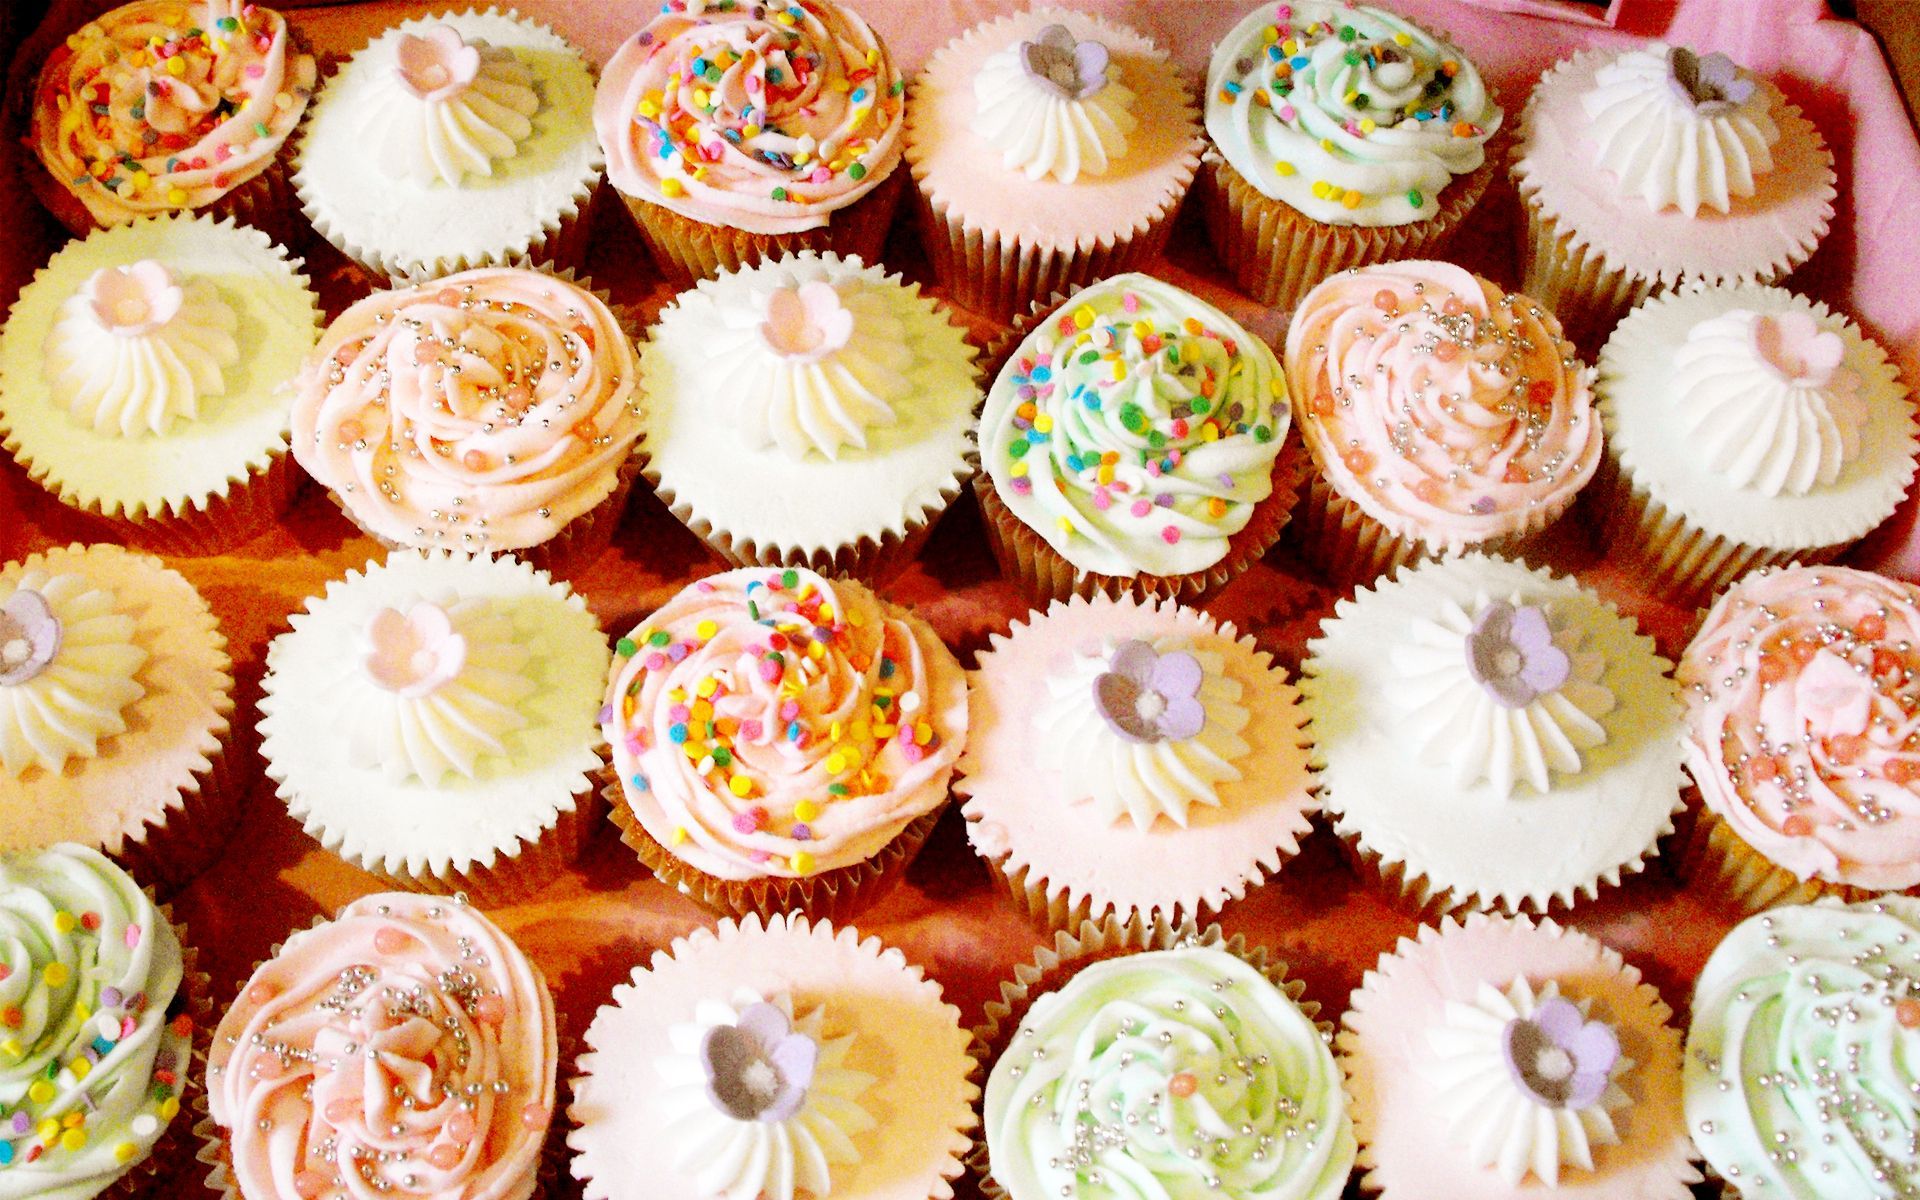 30 Cupcake Wallpapers and Desktop Backgrounds | Solo Foods